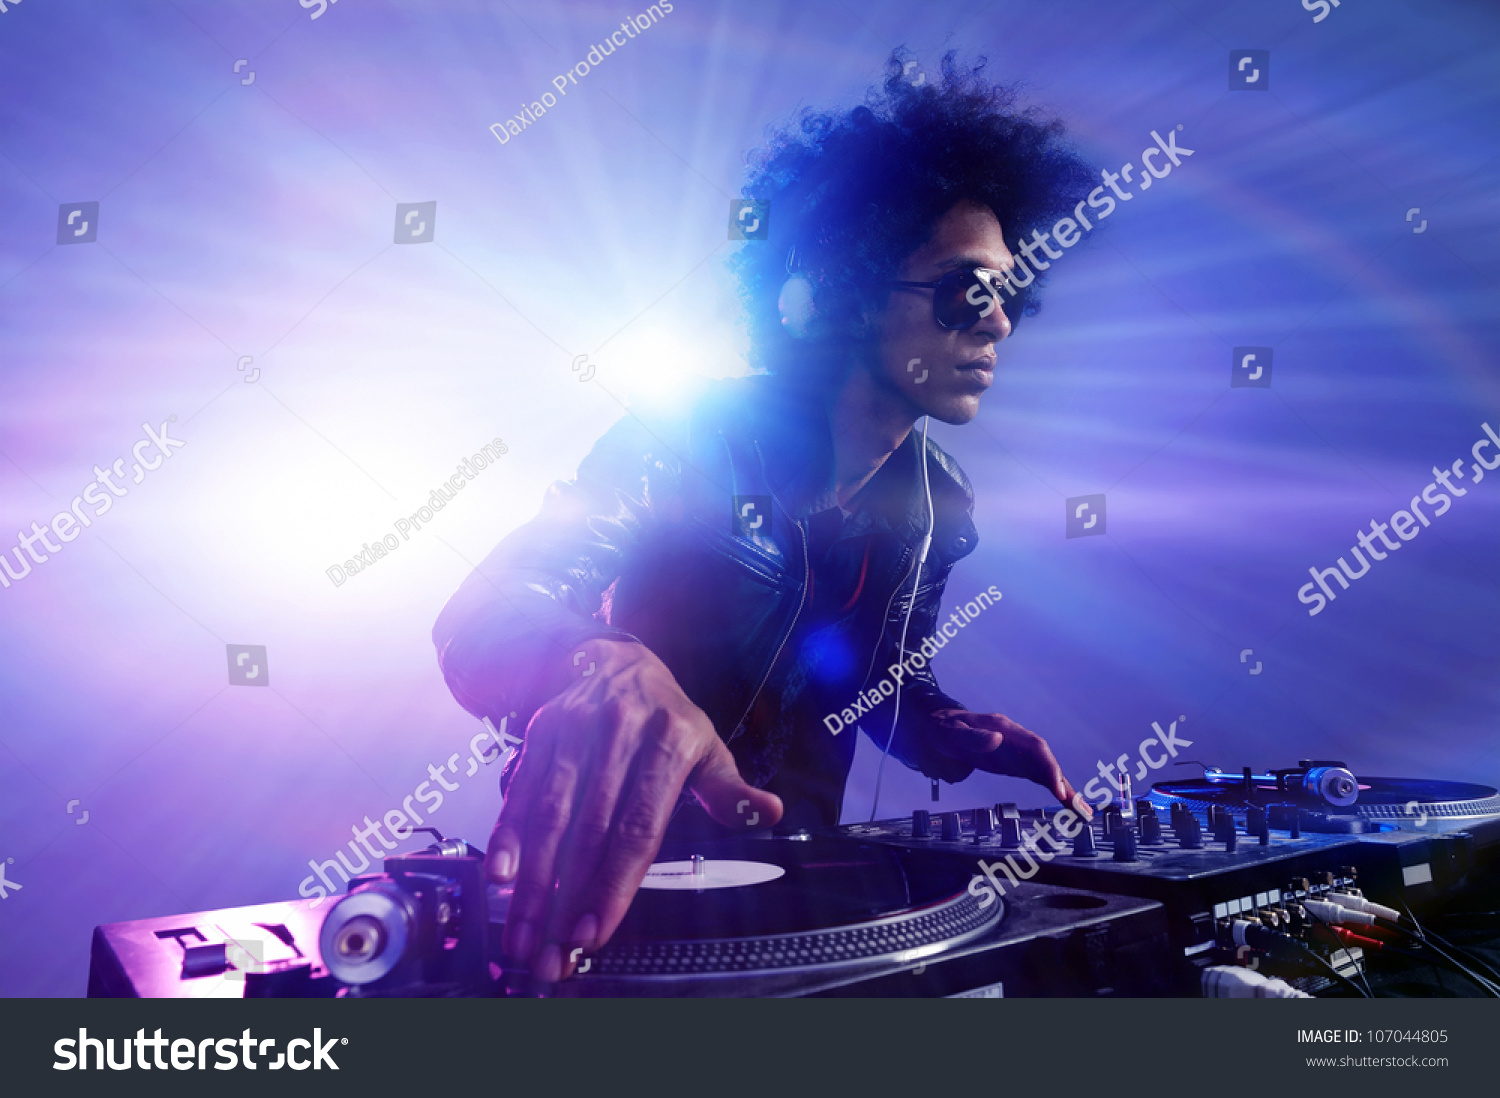 Club DJ with afro hairstyle playing mixing music on vinyl turntable at party wearing sunglasses with lens flare from nightlife lights. #107044805